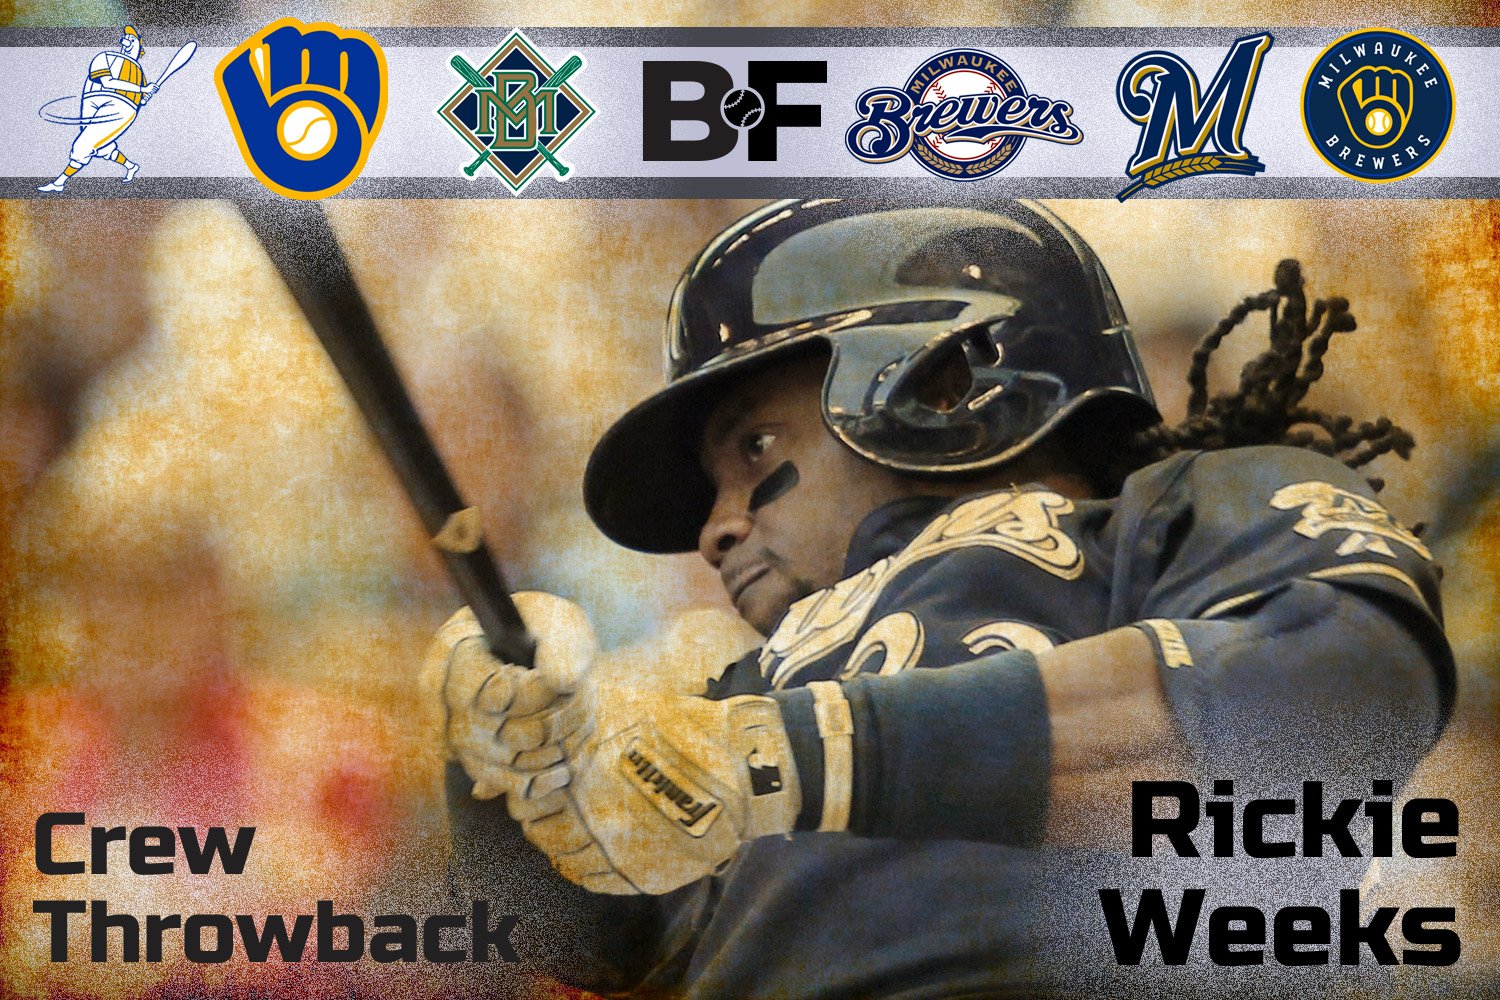 Meet your 2012 Brewers